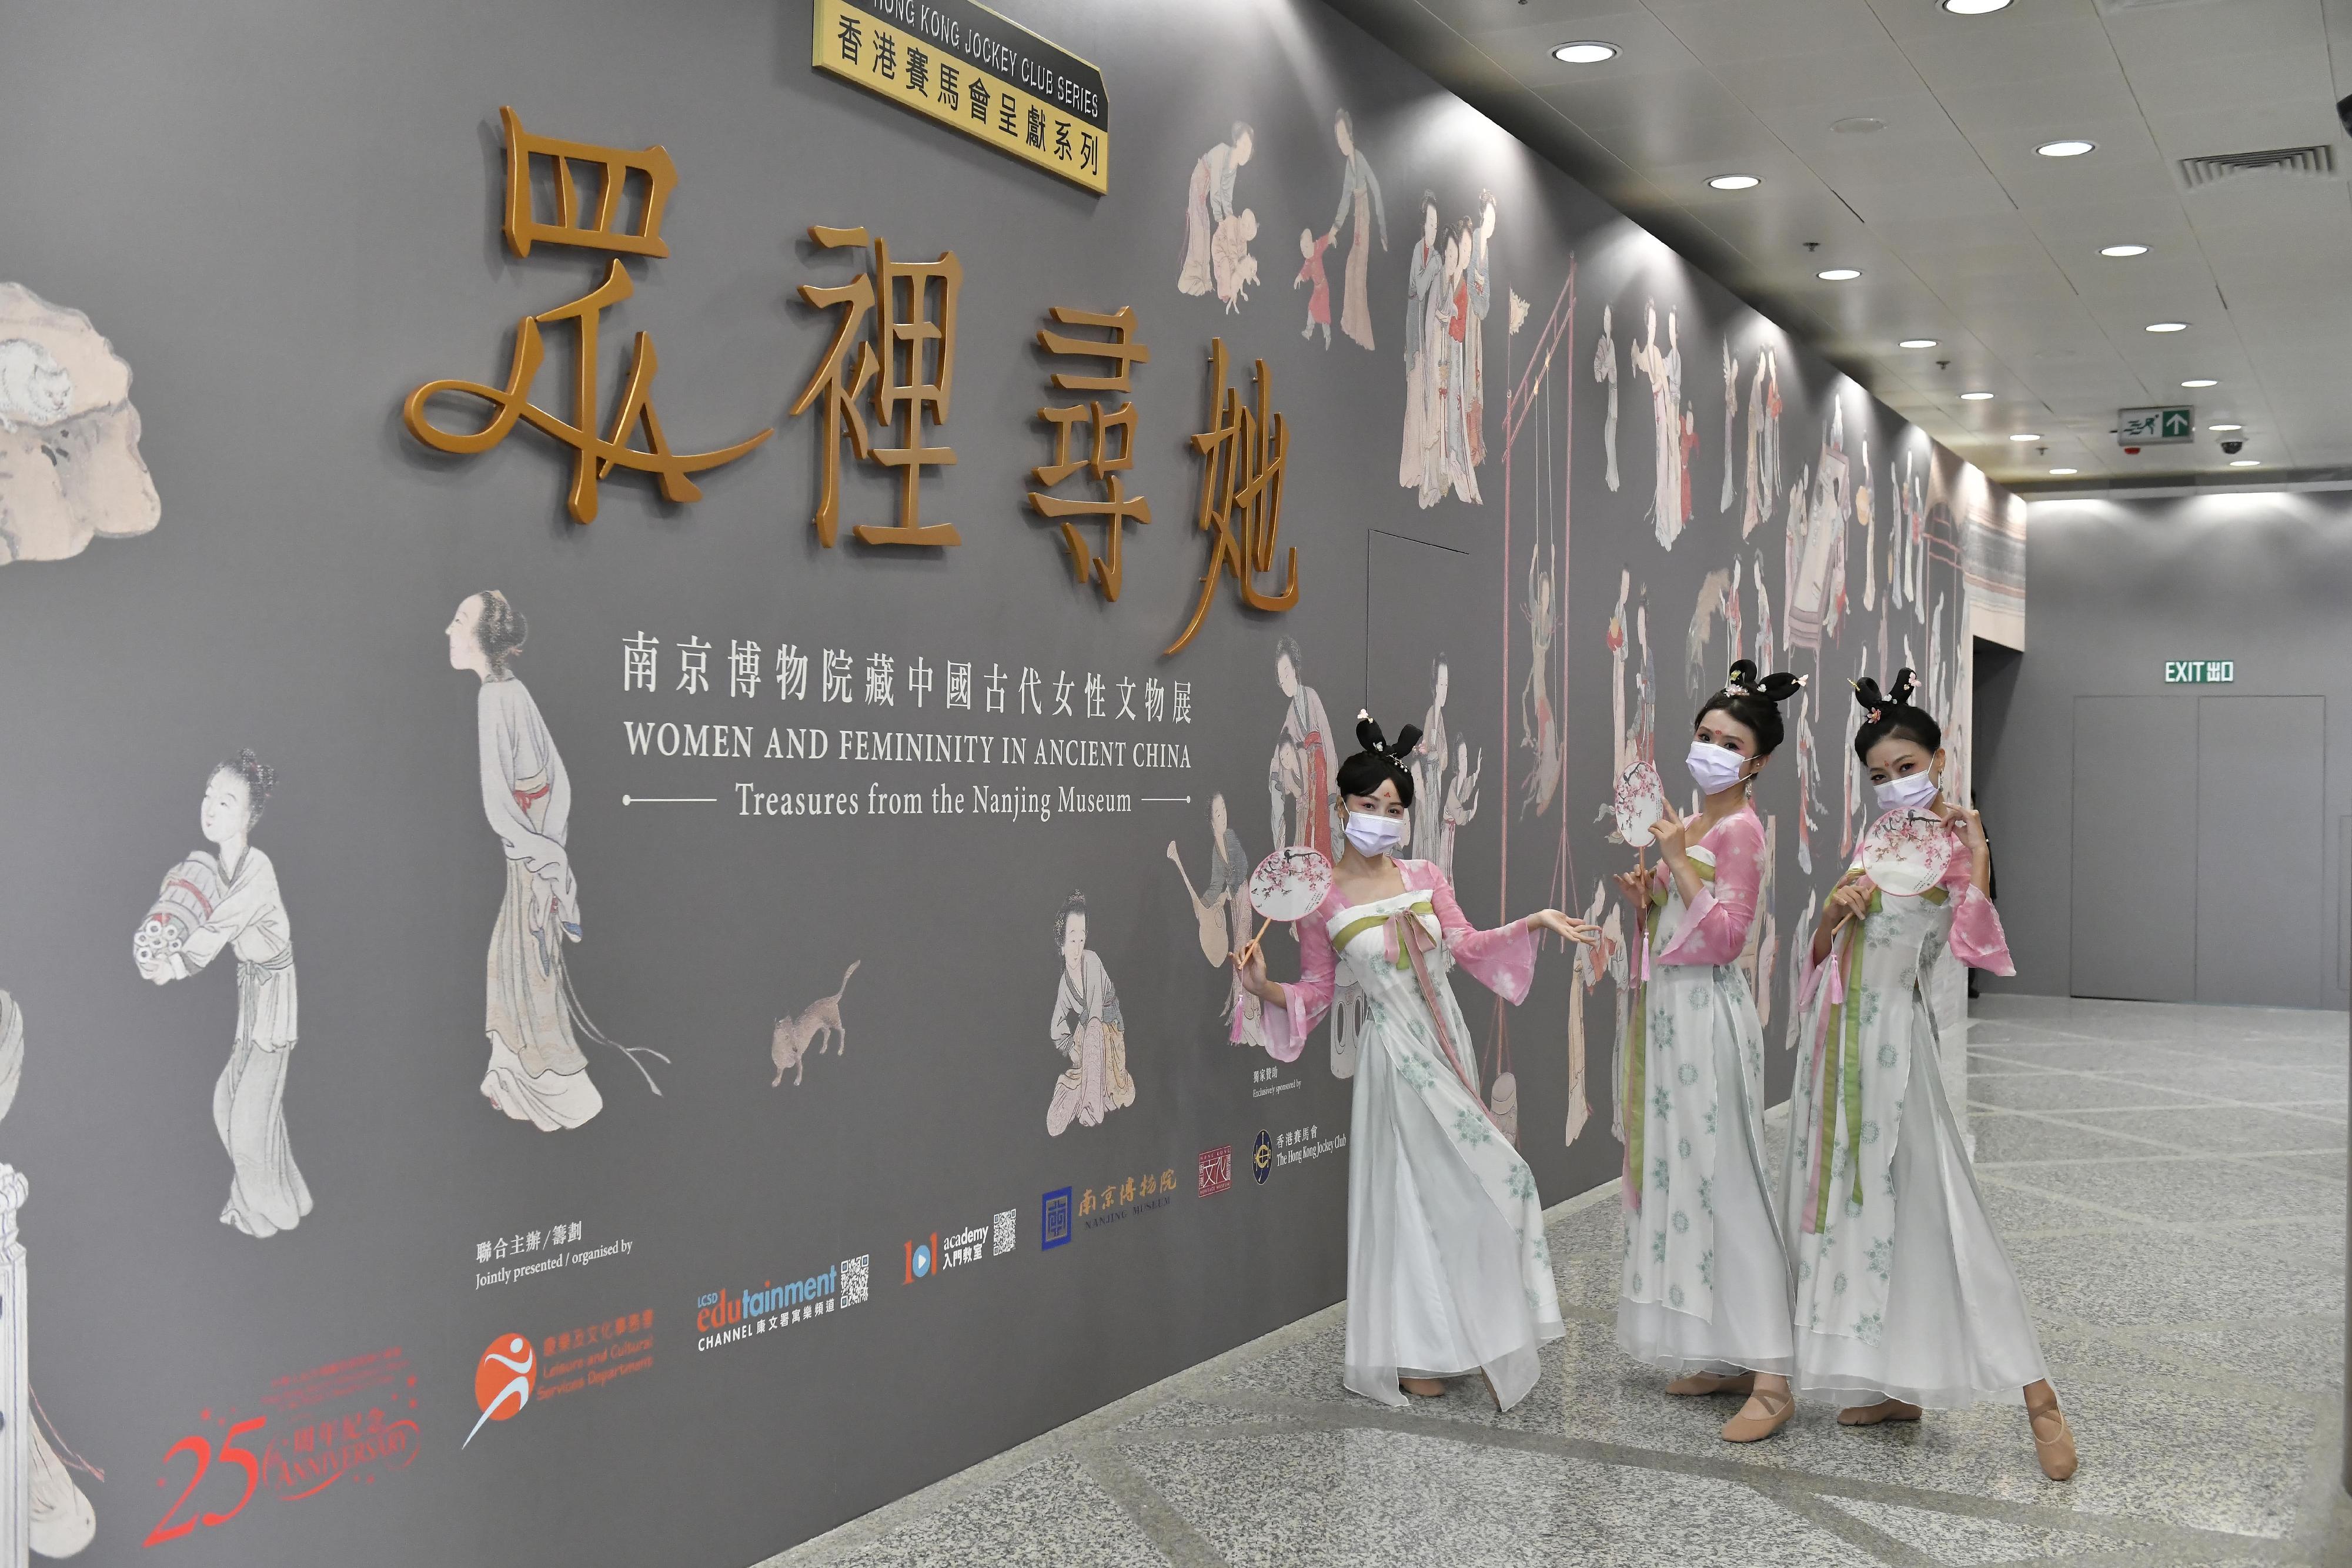 "The Hong Kong Jockey Club Series: Women and Femininity in Ancient China - Treasures from the Nanjing Museum" exhibition being held at the Hong Kong Heritage Museum will end on February 27 (Monday). Members of the public are encouraged to grasp the opportunity to visit this not-to-be-missed exhibition.